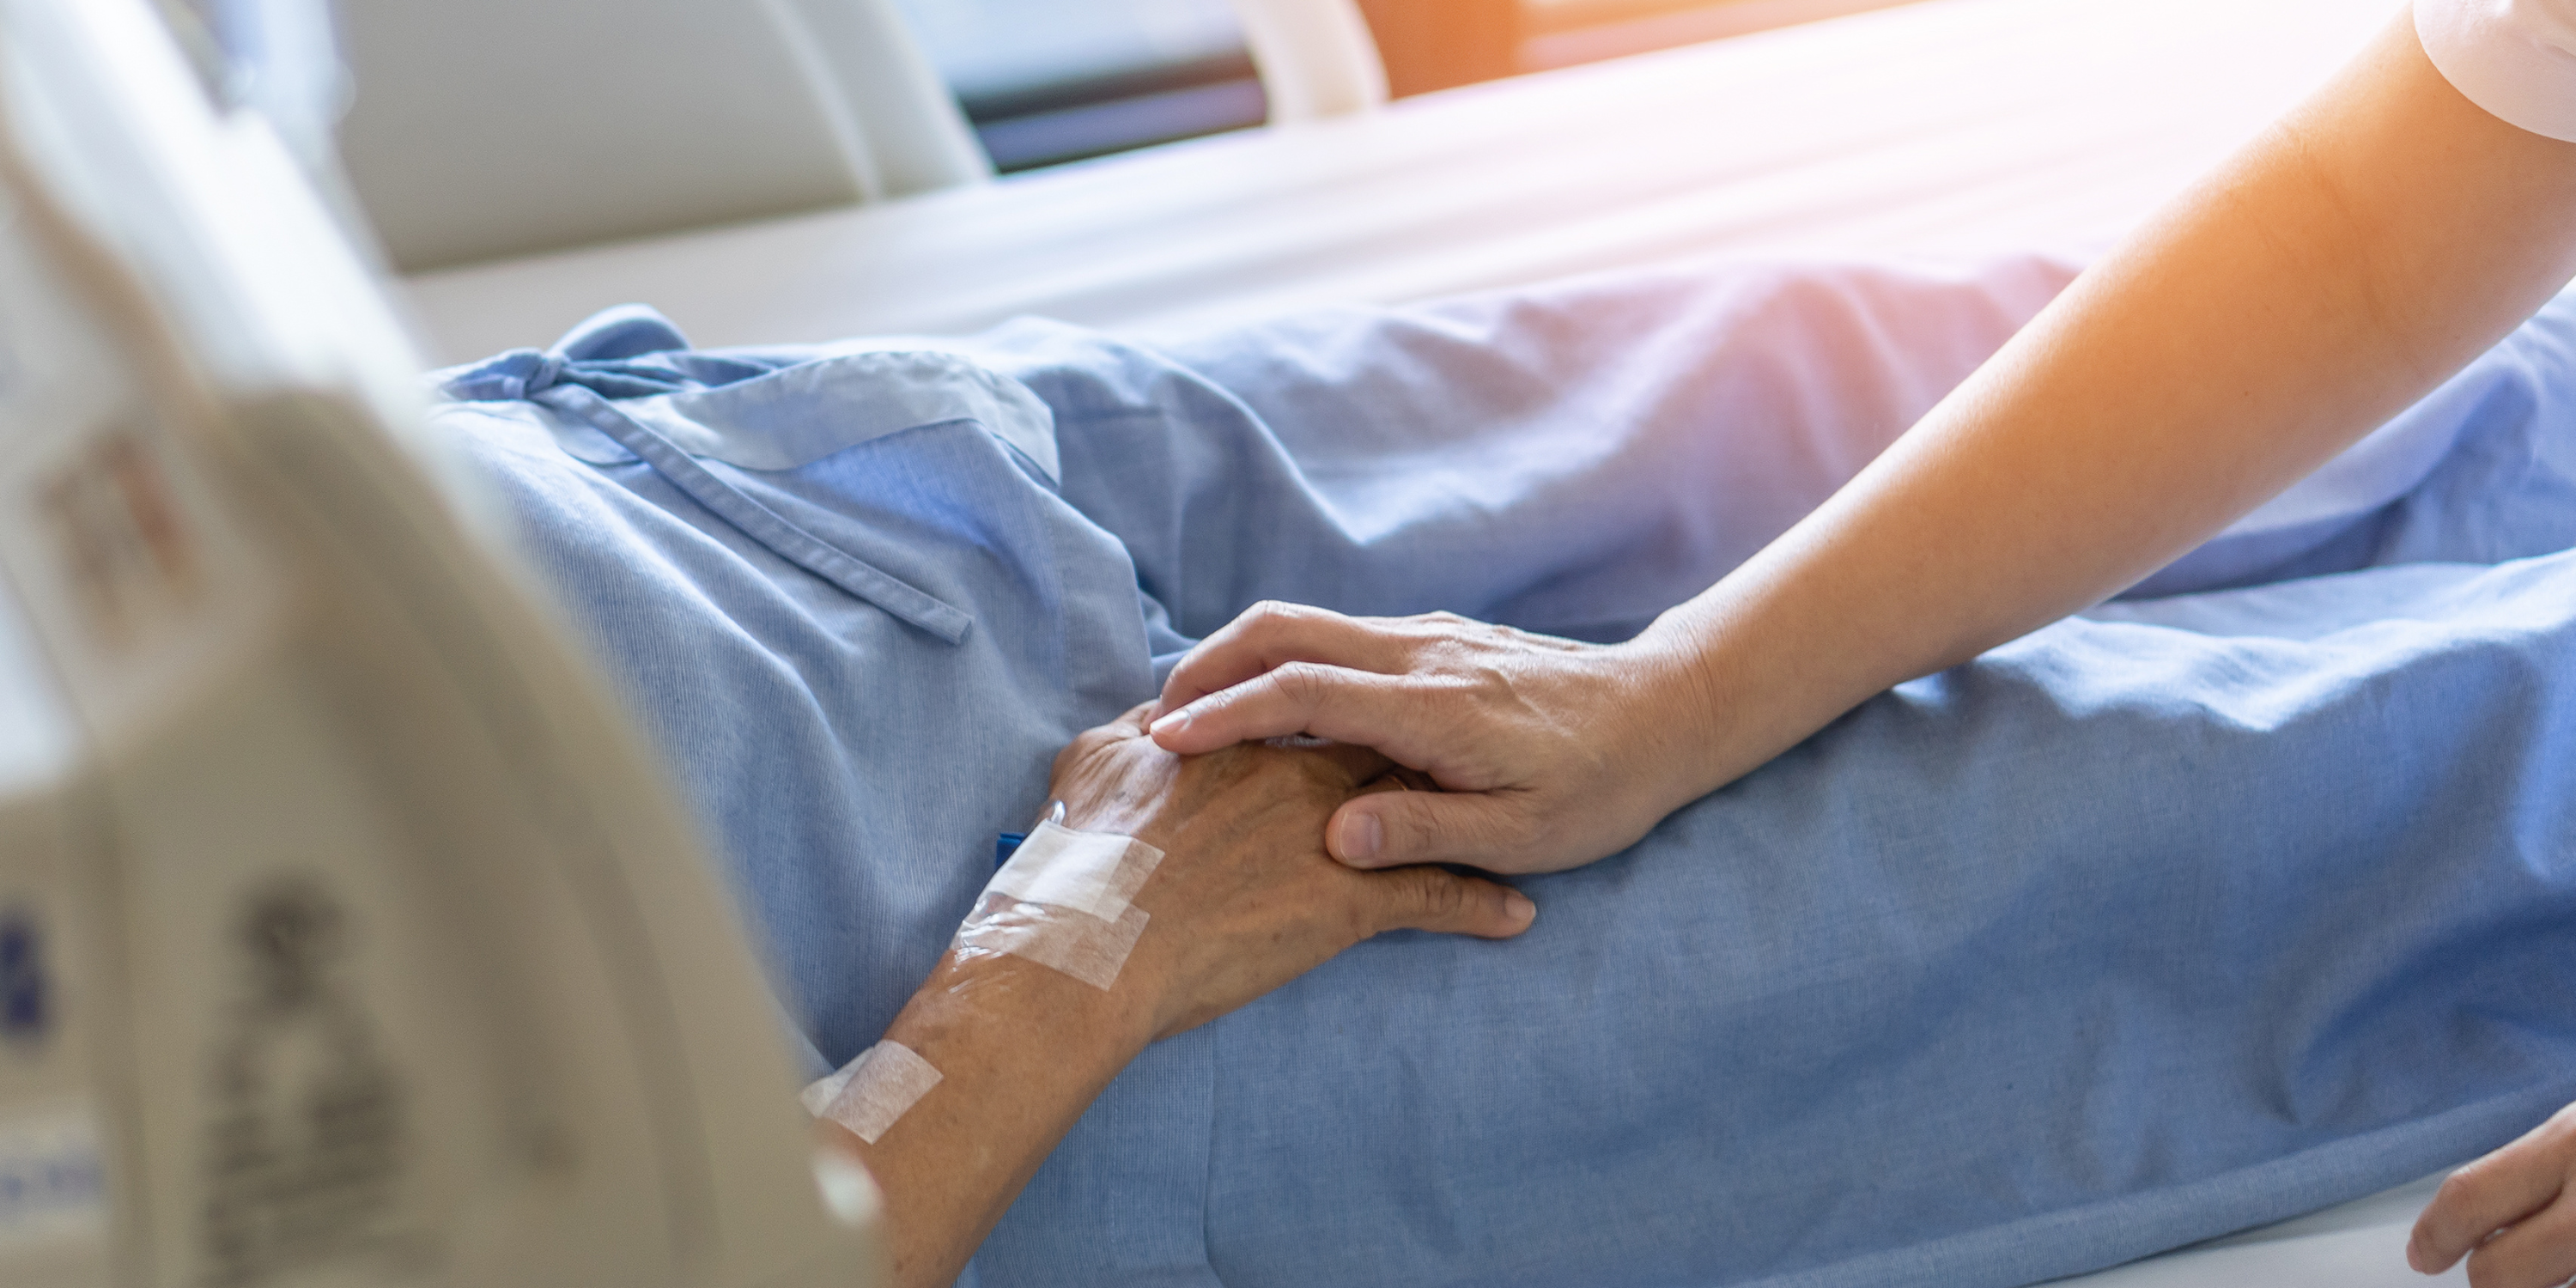 A hand resting on another hand of a person who is laying in a hospital bed, connected to IVs.